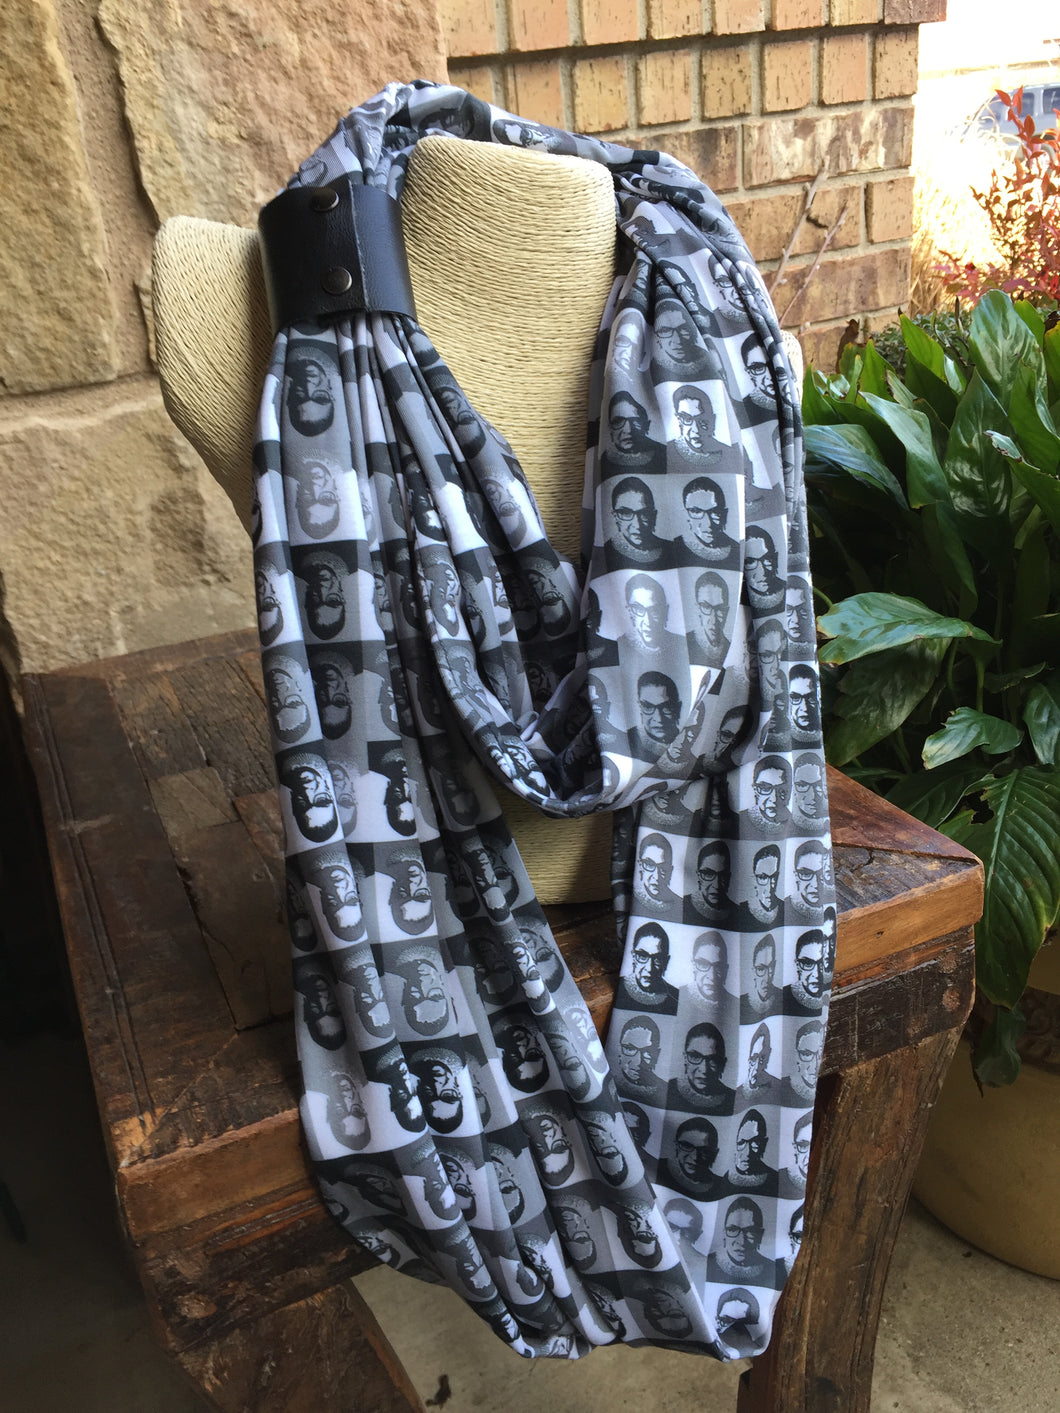 Infinity Scarves - Infinity Scarf Made With RBG Inspired Fabric - Ruth Bader Ginsburg Inspired